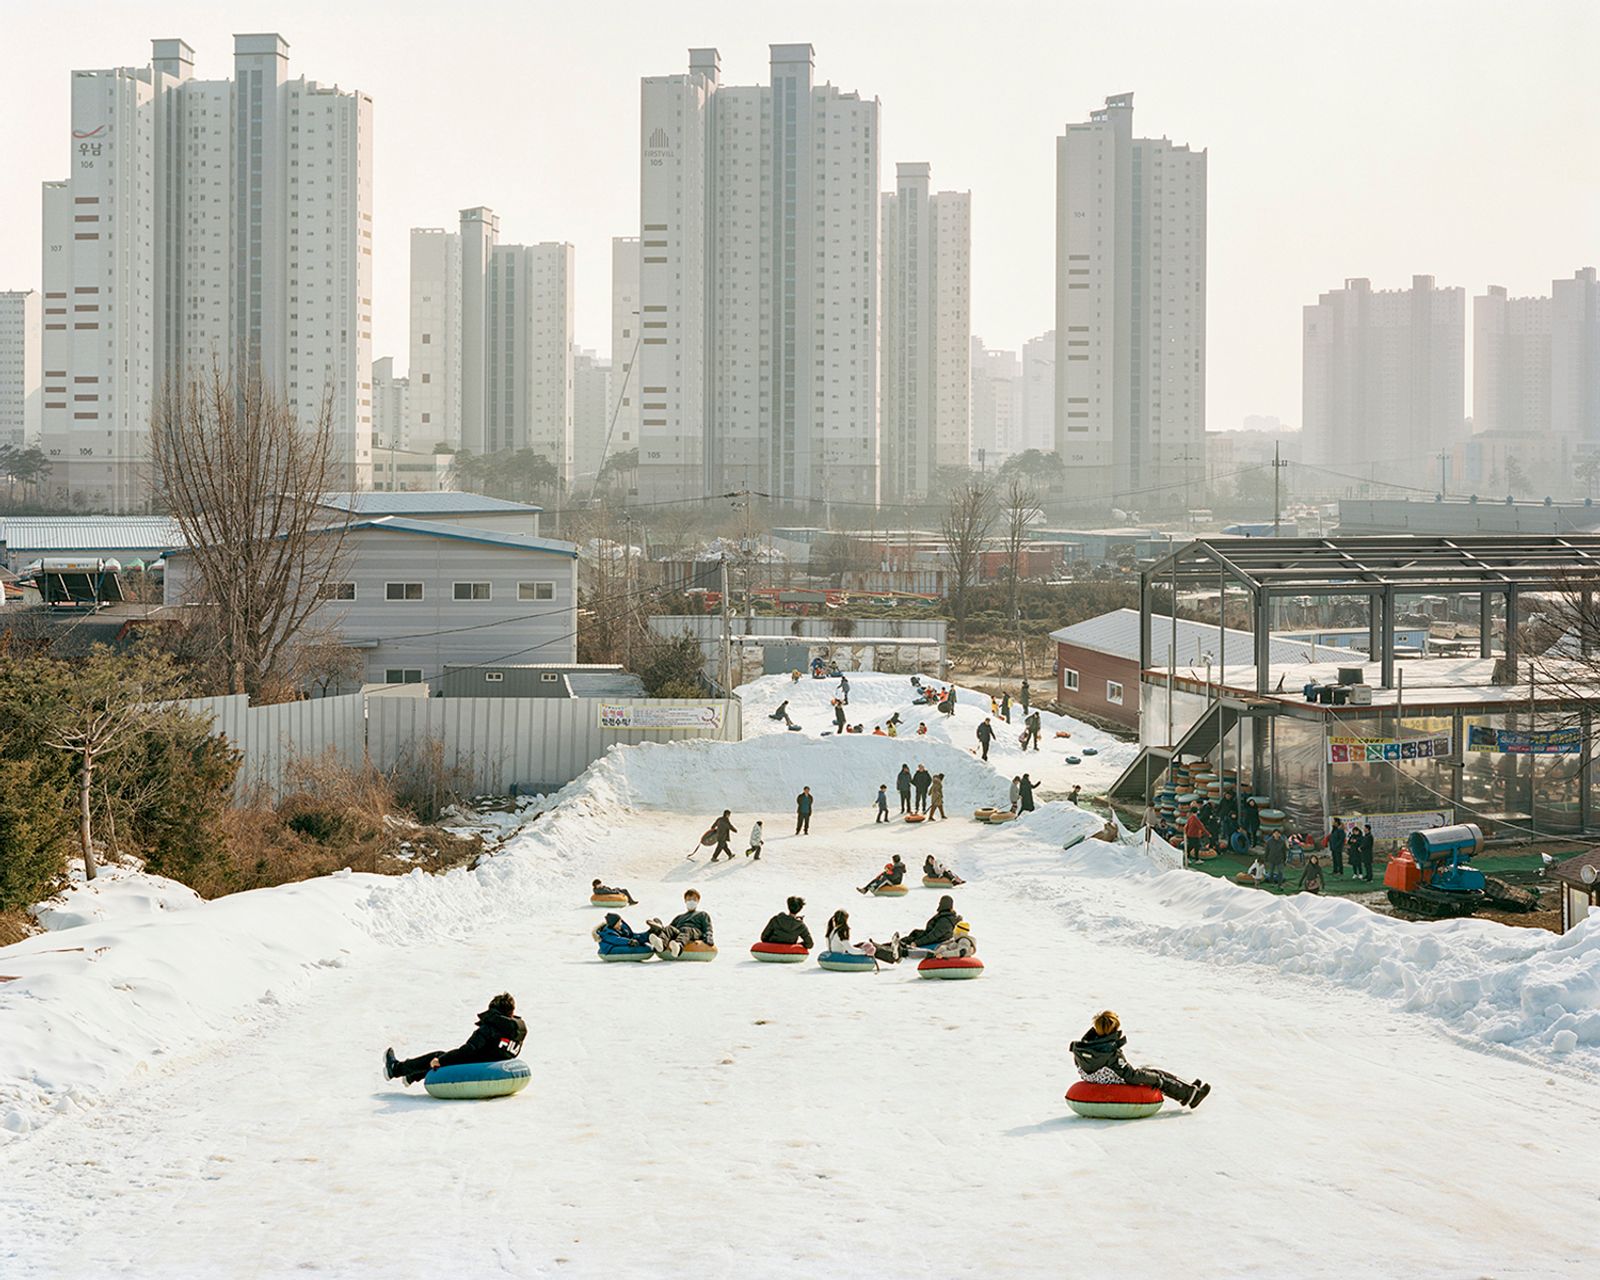 © Seunggu Kim - Image from the Better Days photography project